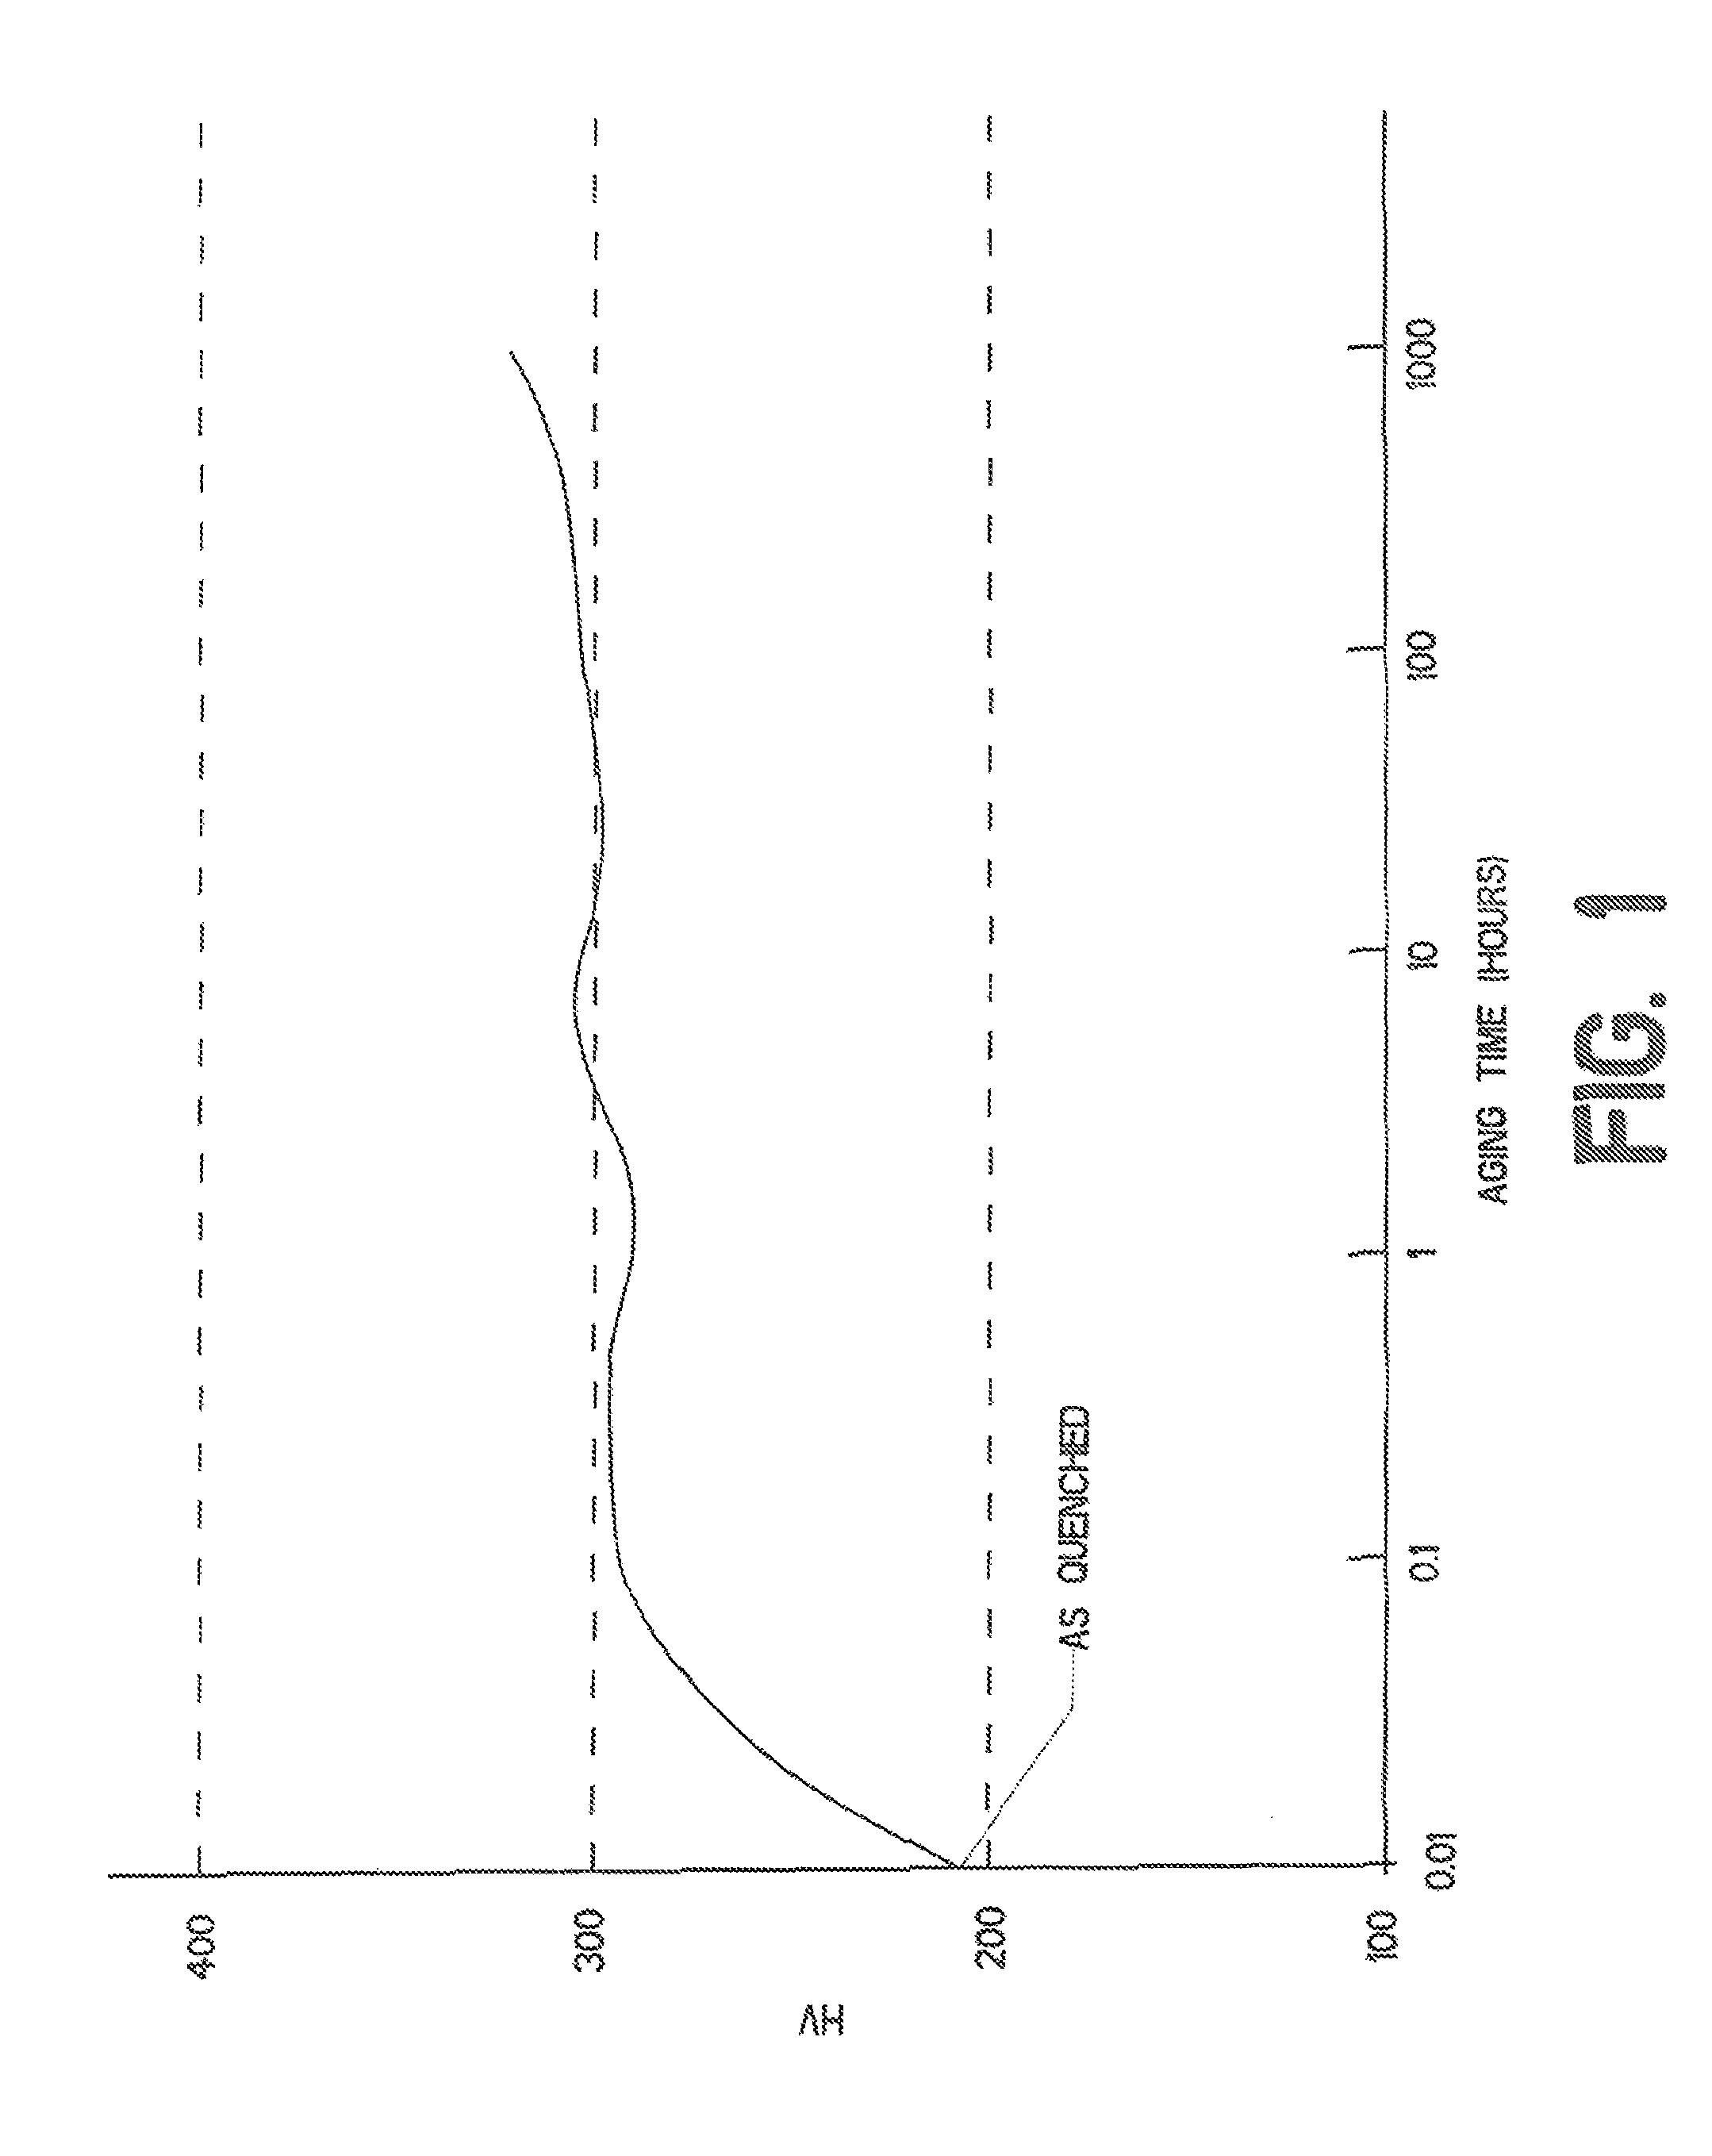 Age-hardening process featuring anomalous aging time